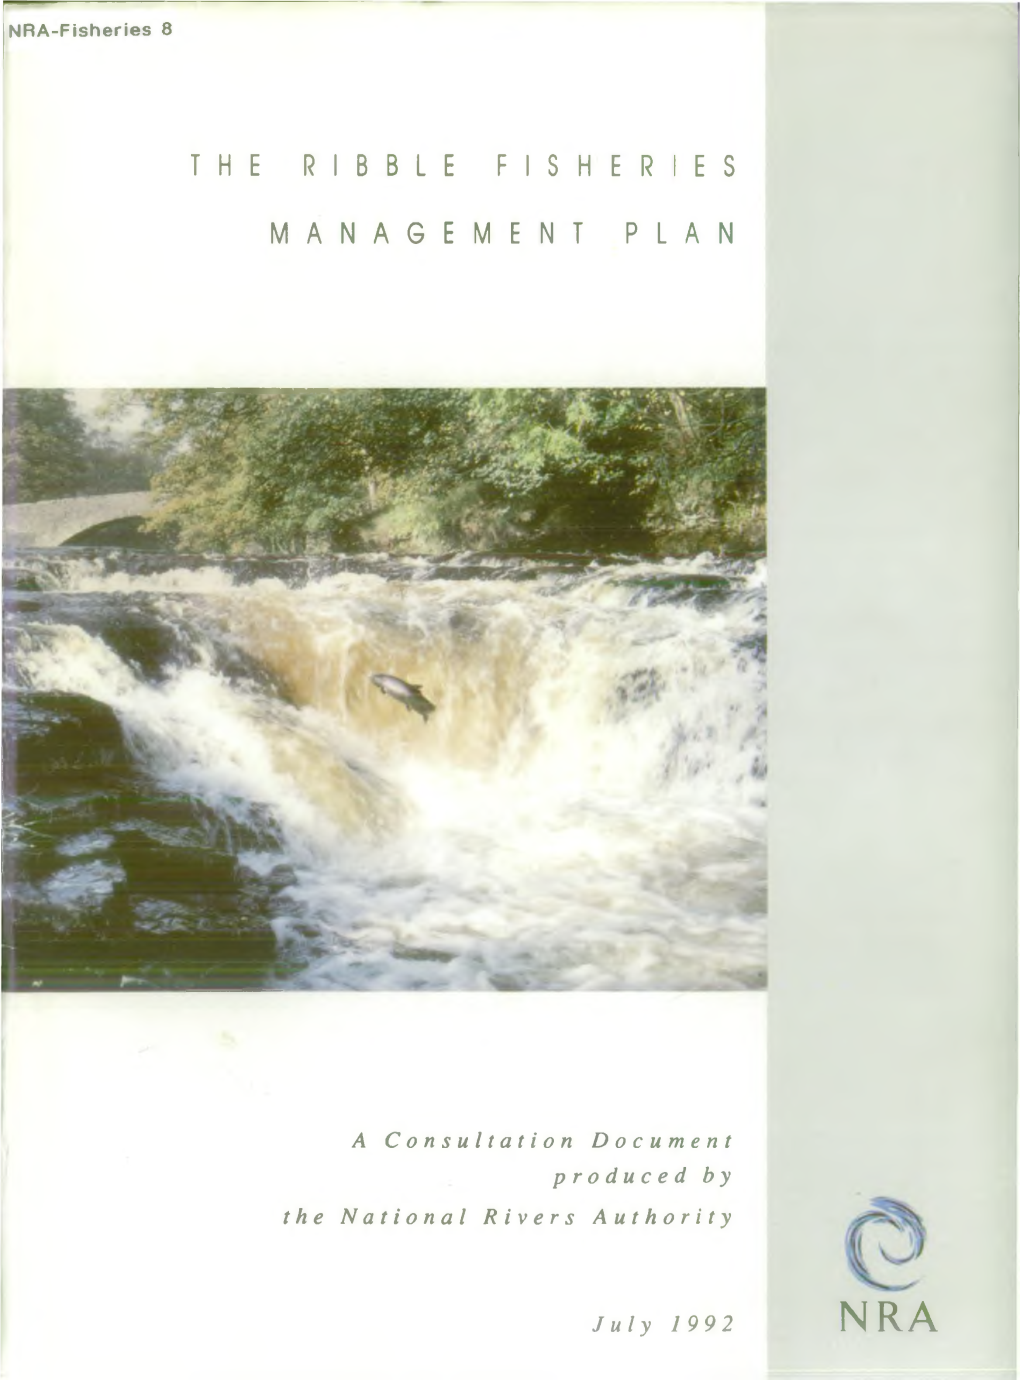 The Ribble Fisheries Management Plan